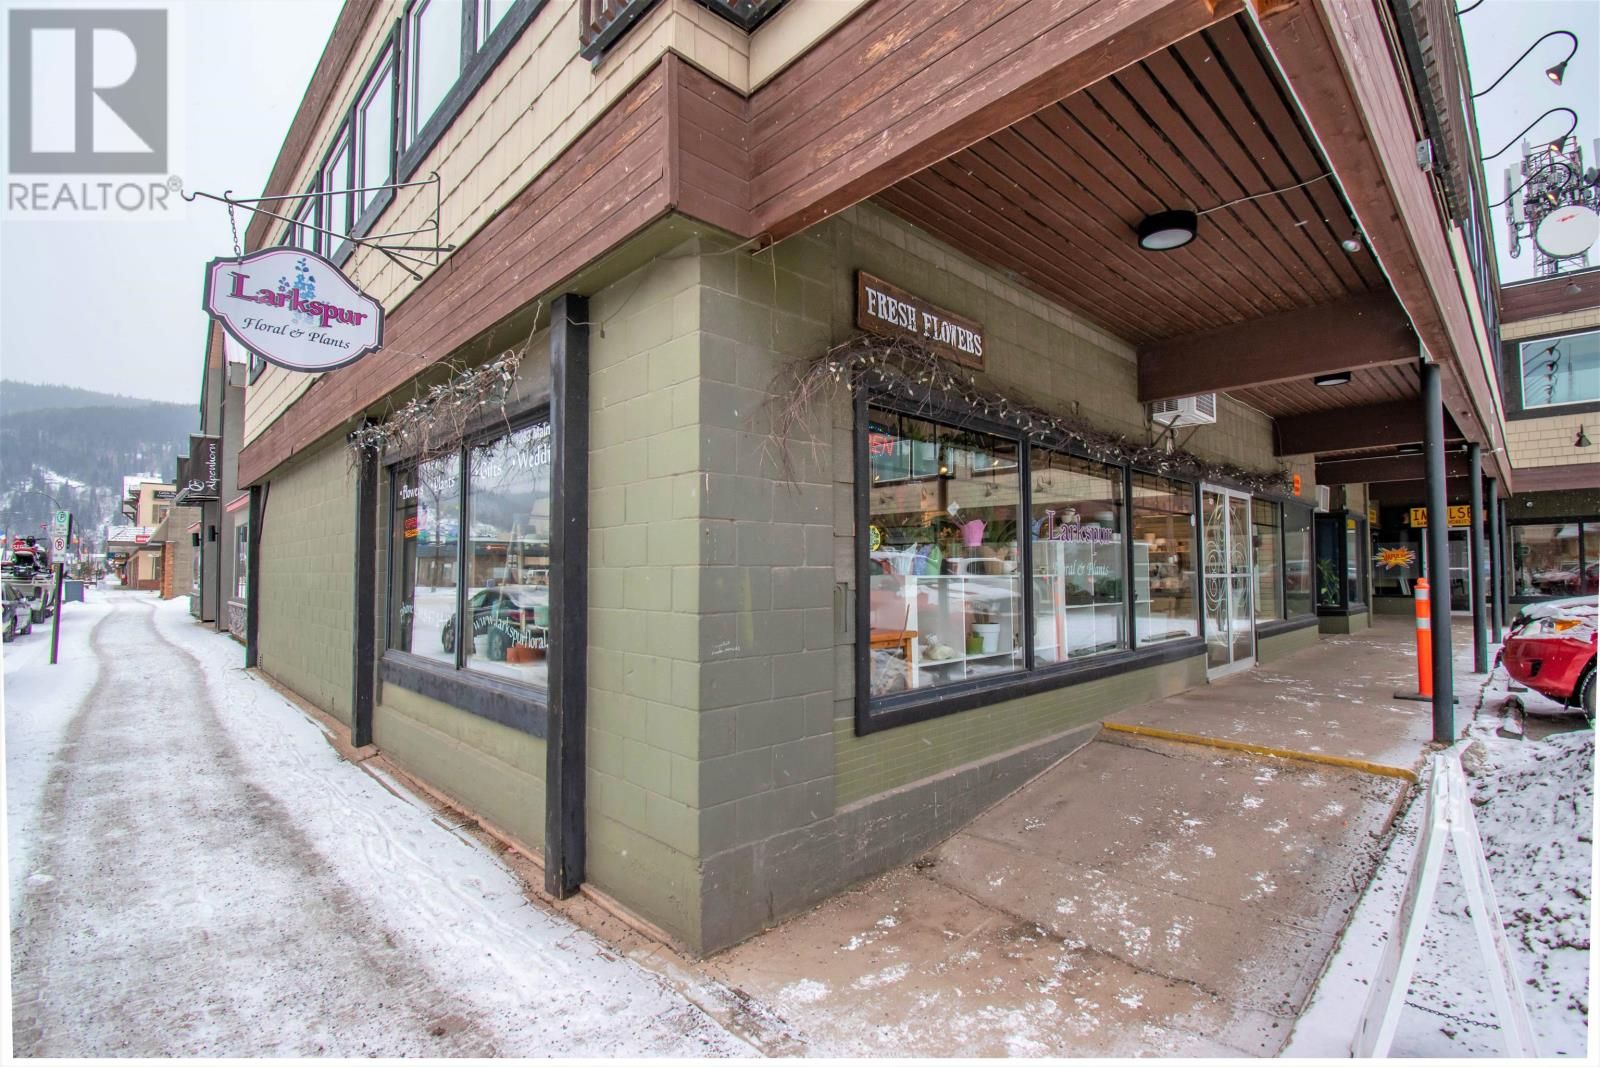 Main Photo: 101 1283 MAIN STREET in Smithers And Area: Business for sale : MLS®# C8049216